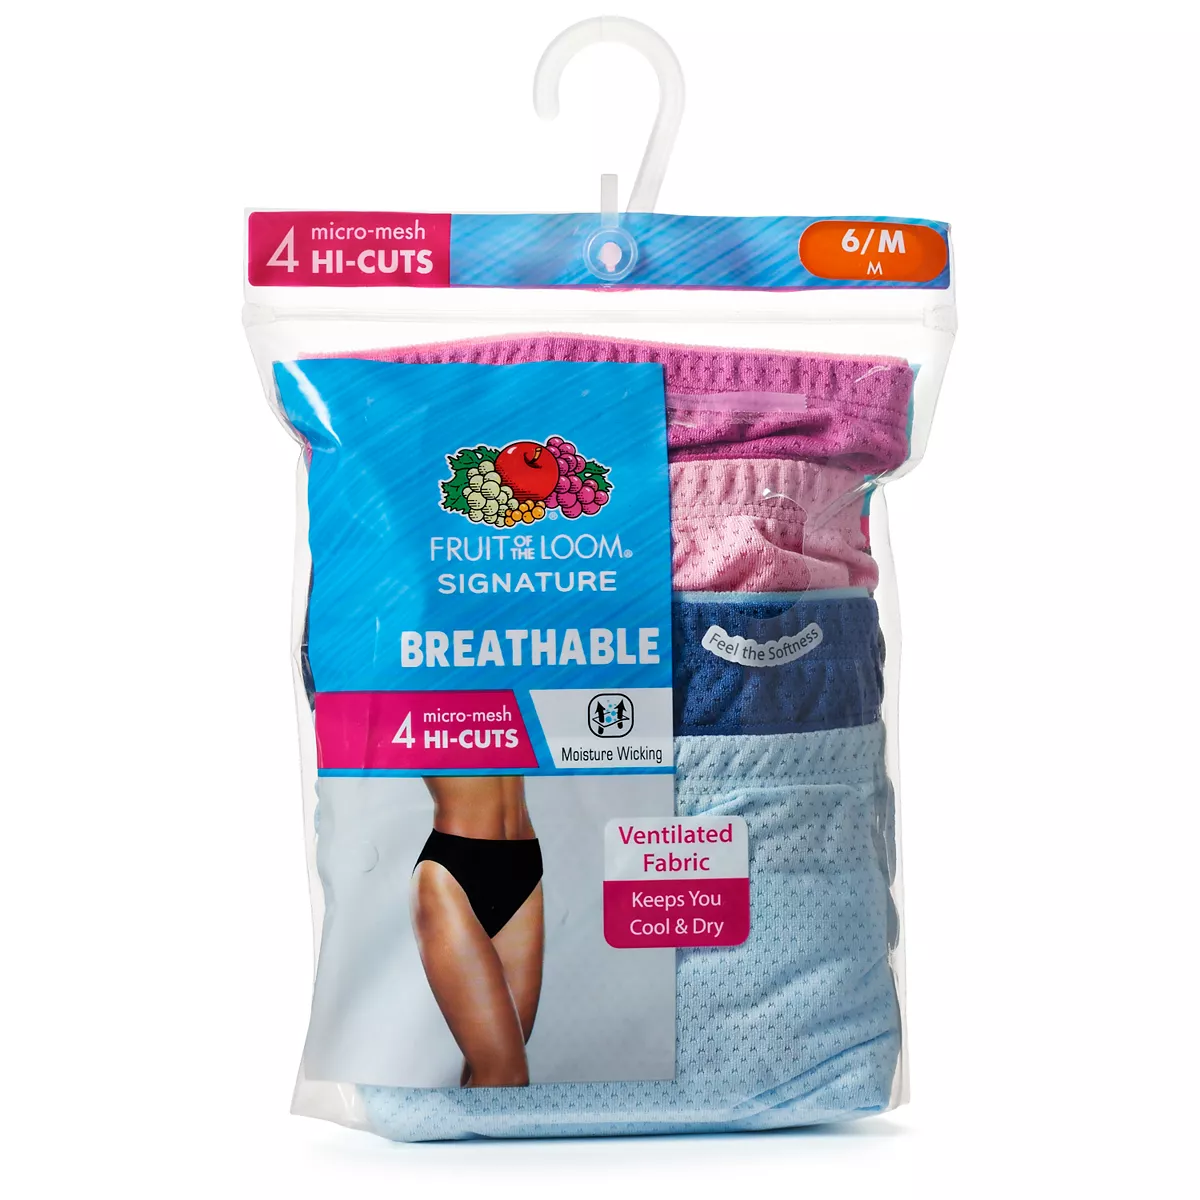 Fruit of the Loom Women's 6 Pack Breathable Micro-Mesh Hi-Cuts Sizes 6,8,10